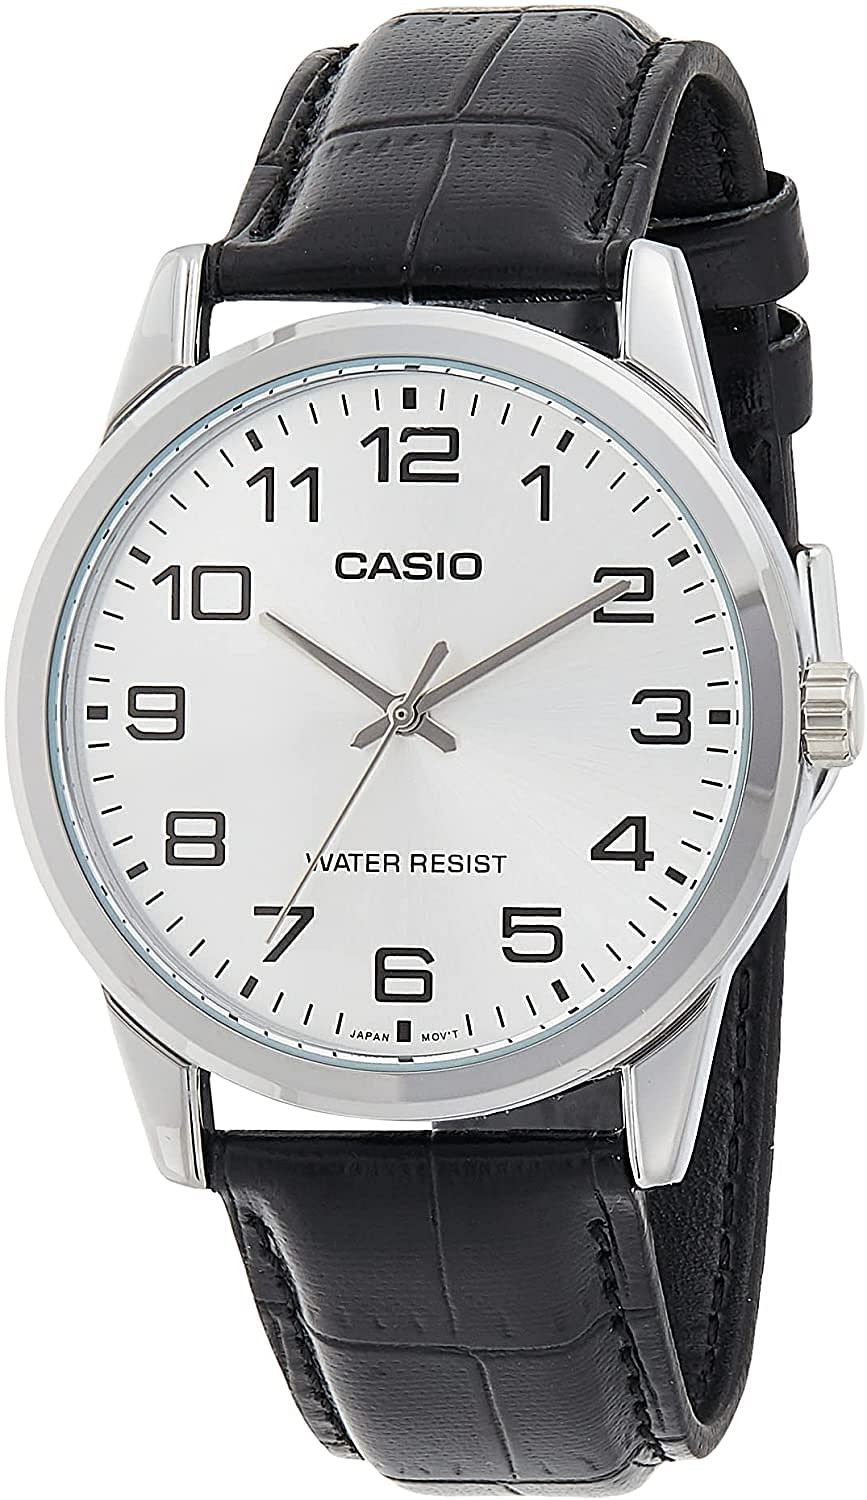 Casio men's Watch with Genuine Leather 38 millimeters, MTP-V001L-7 white  Black